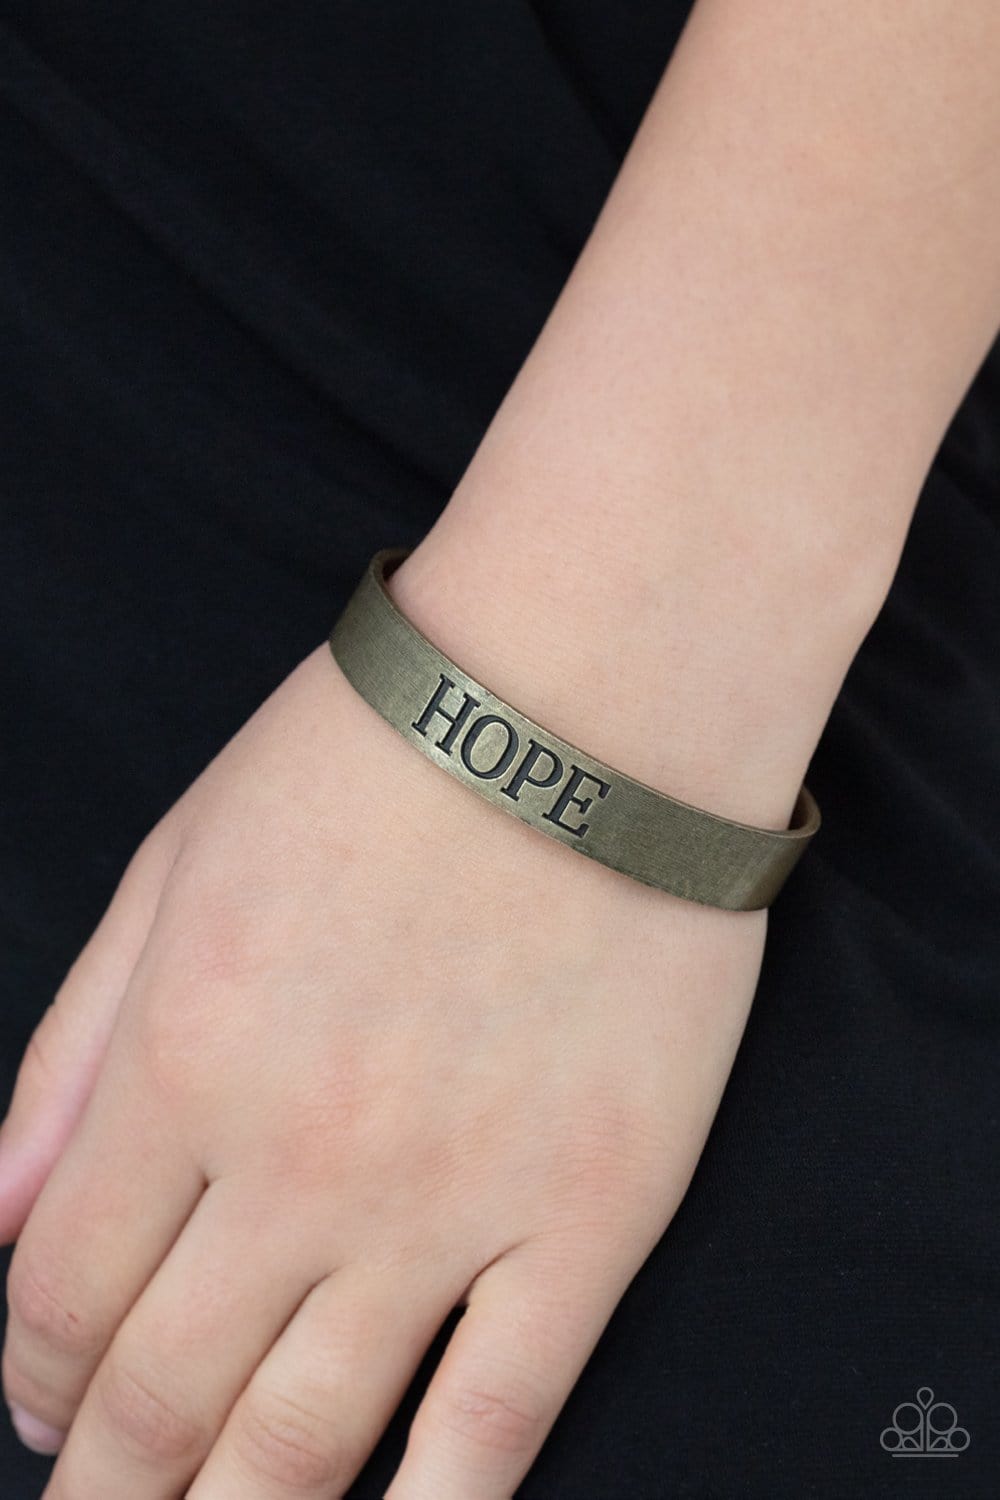 Paparazzi Accessories: Hope Makes The World Go Round - Brass Rustic Inspirational Bracelet - Jewels N Thingz Boutique